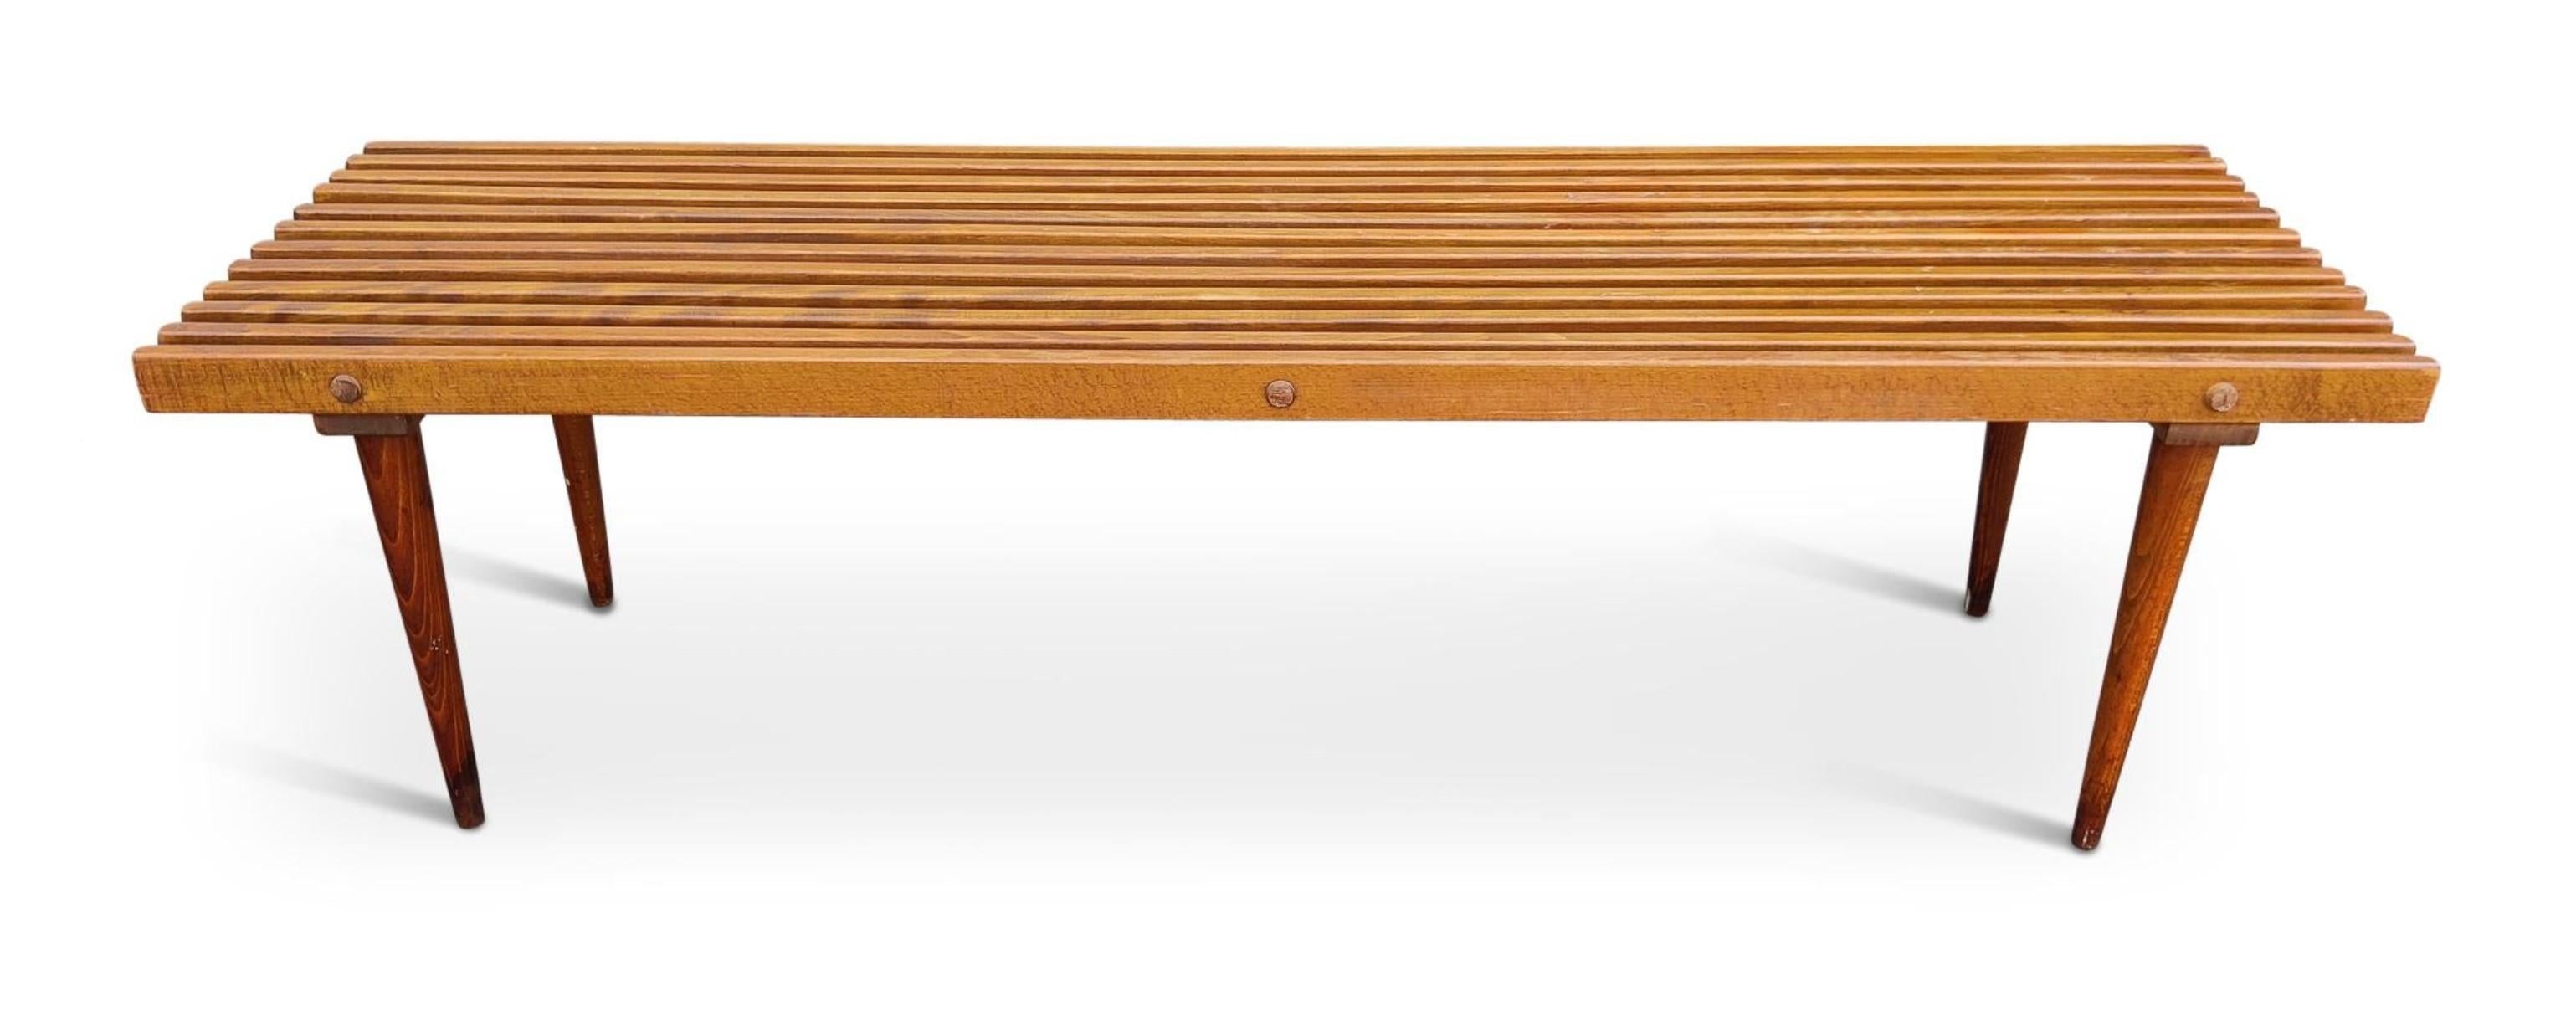 Mid-century slatted bench, cocktail table from the mid-1950s. Faintly stamped Yugoslavia on the underside - too faint to be photographed. Created out of a hardwood, beech, this piece is simple and well constructed. Legs unscrew for easy transport